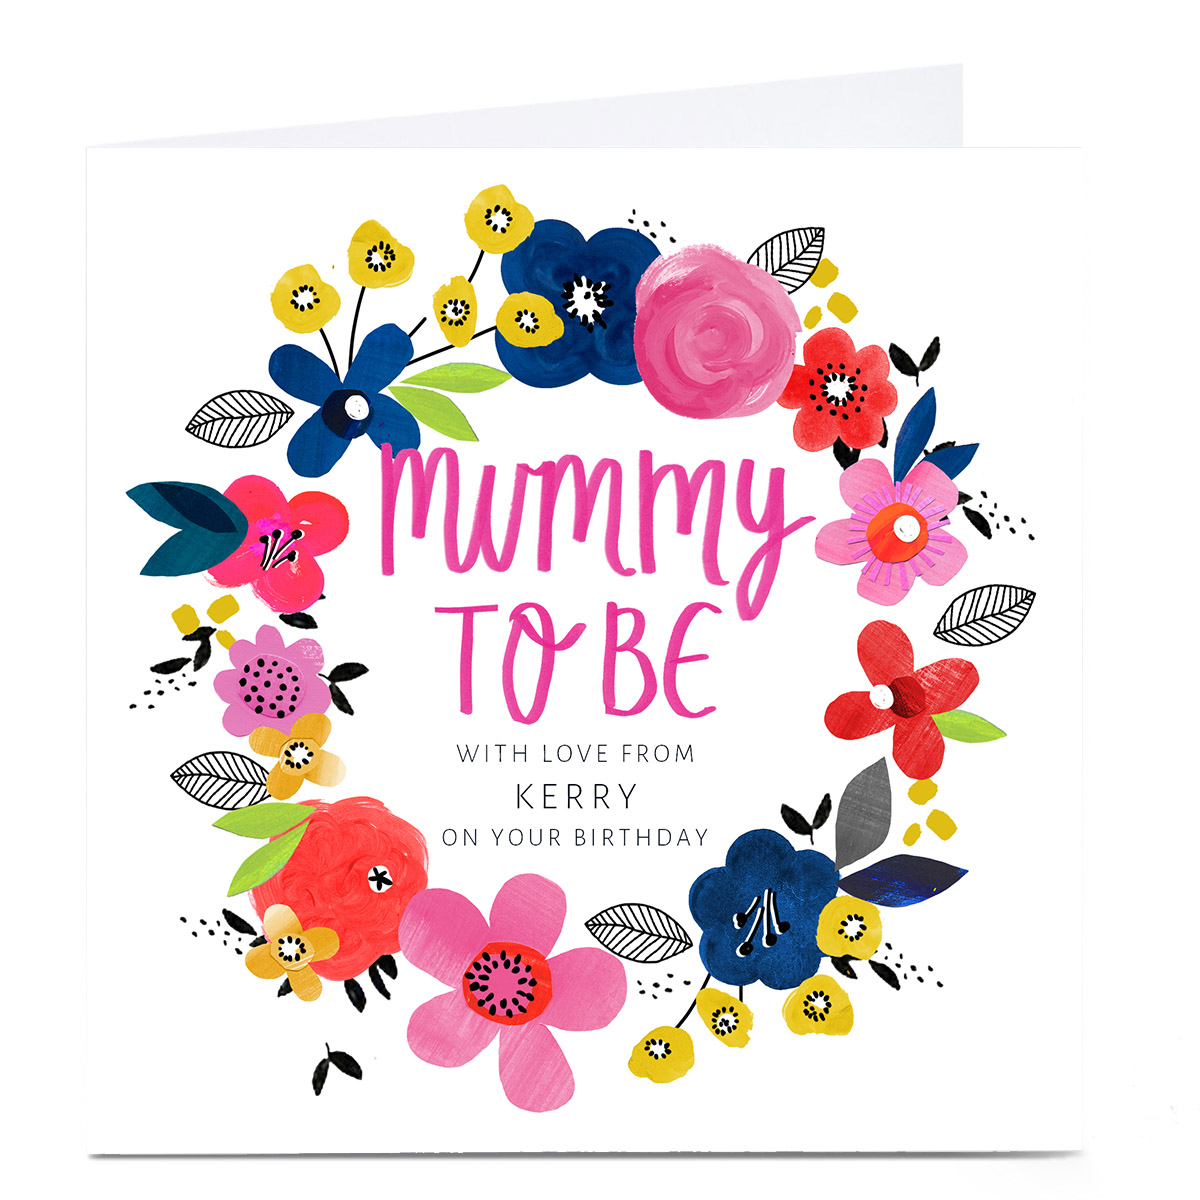 Personalised Kerry Spurling Birthday Card - Mummy-To-Be